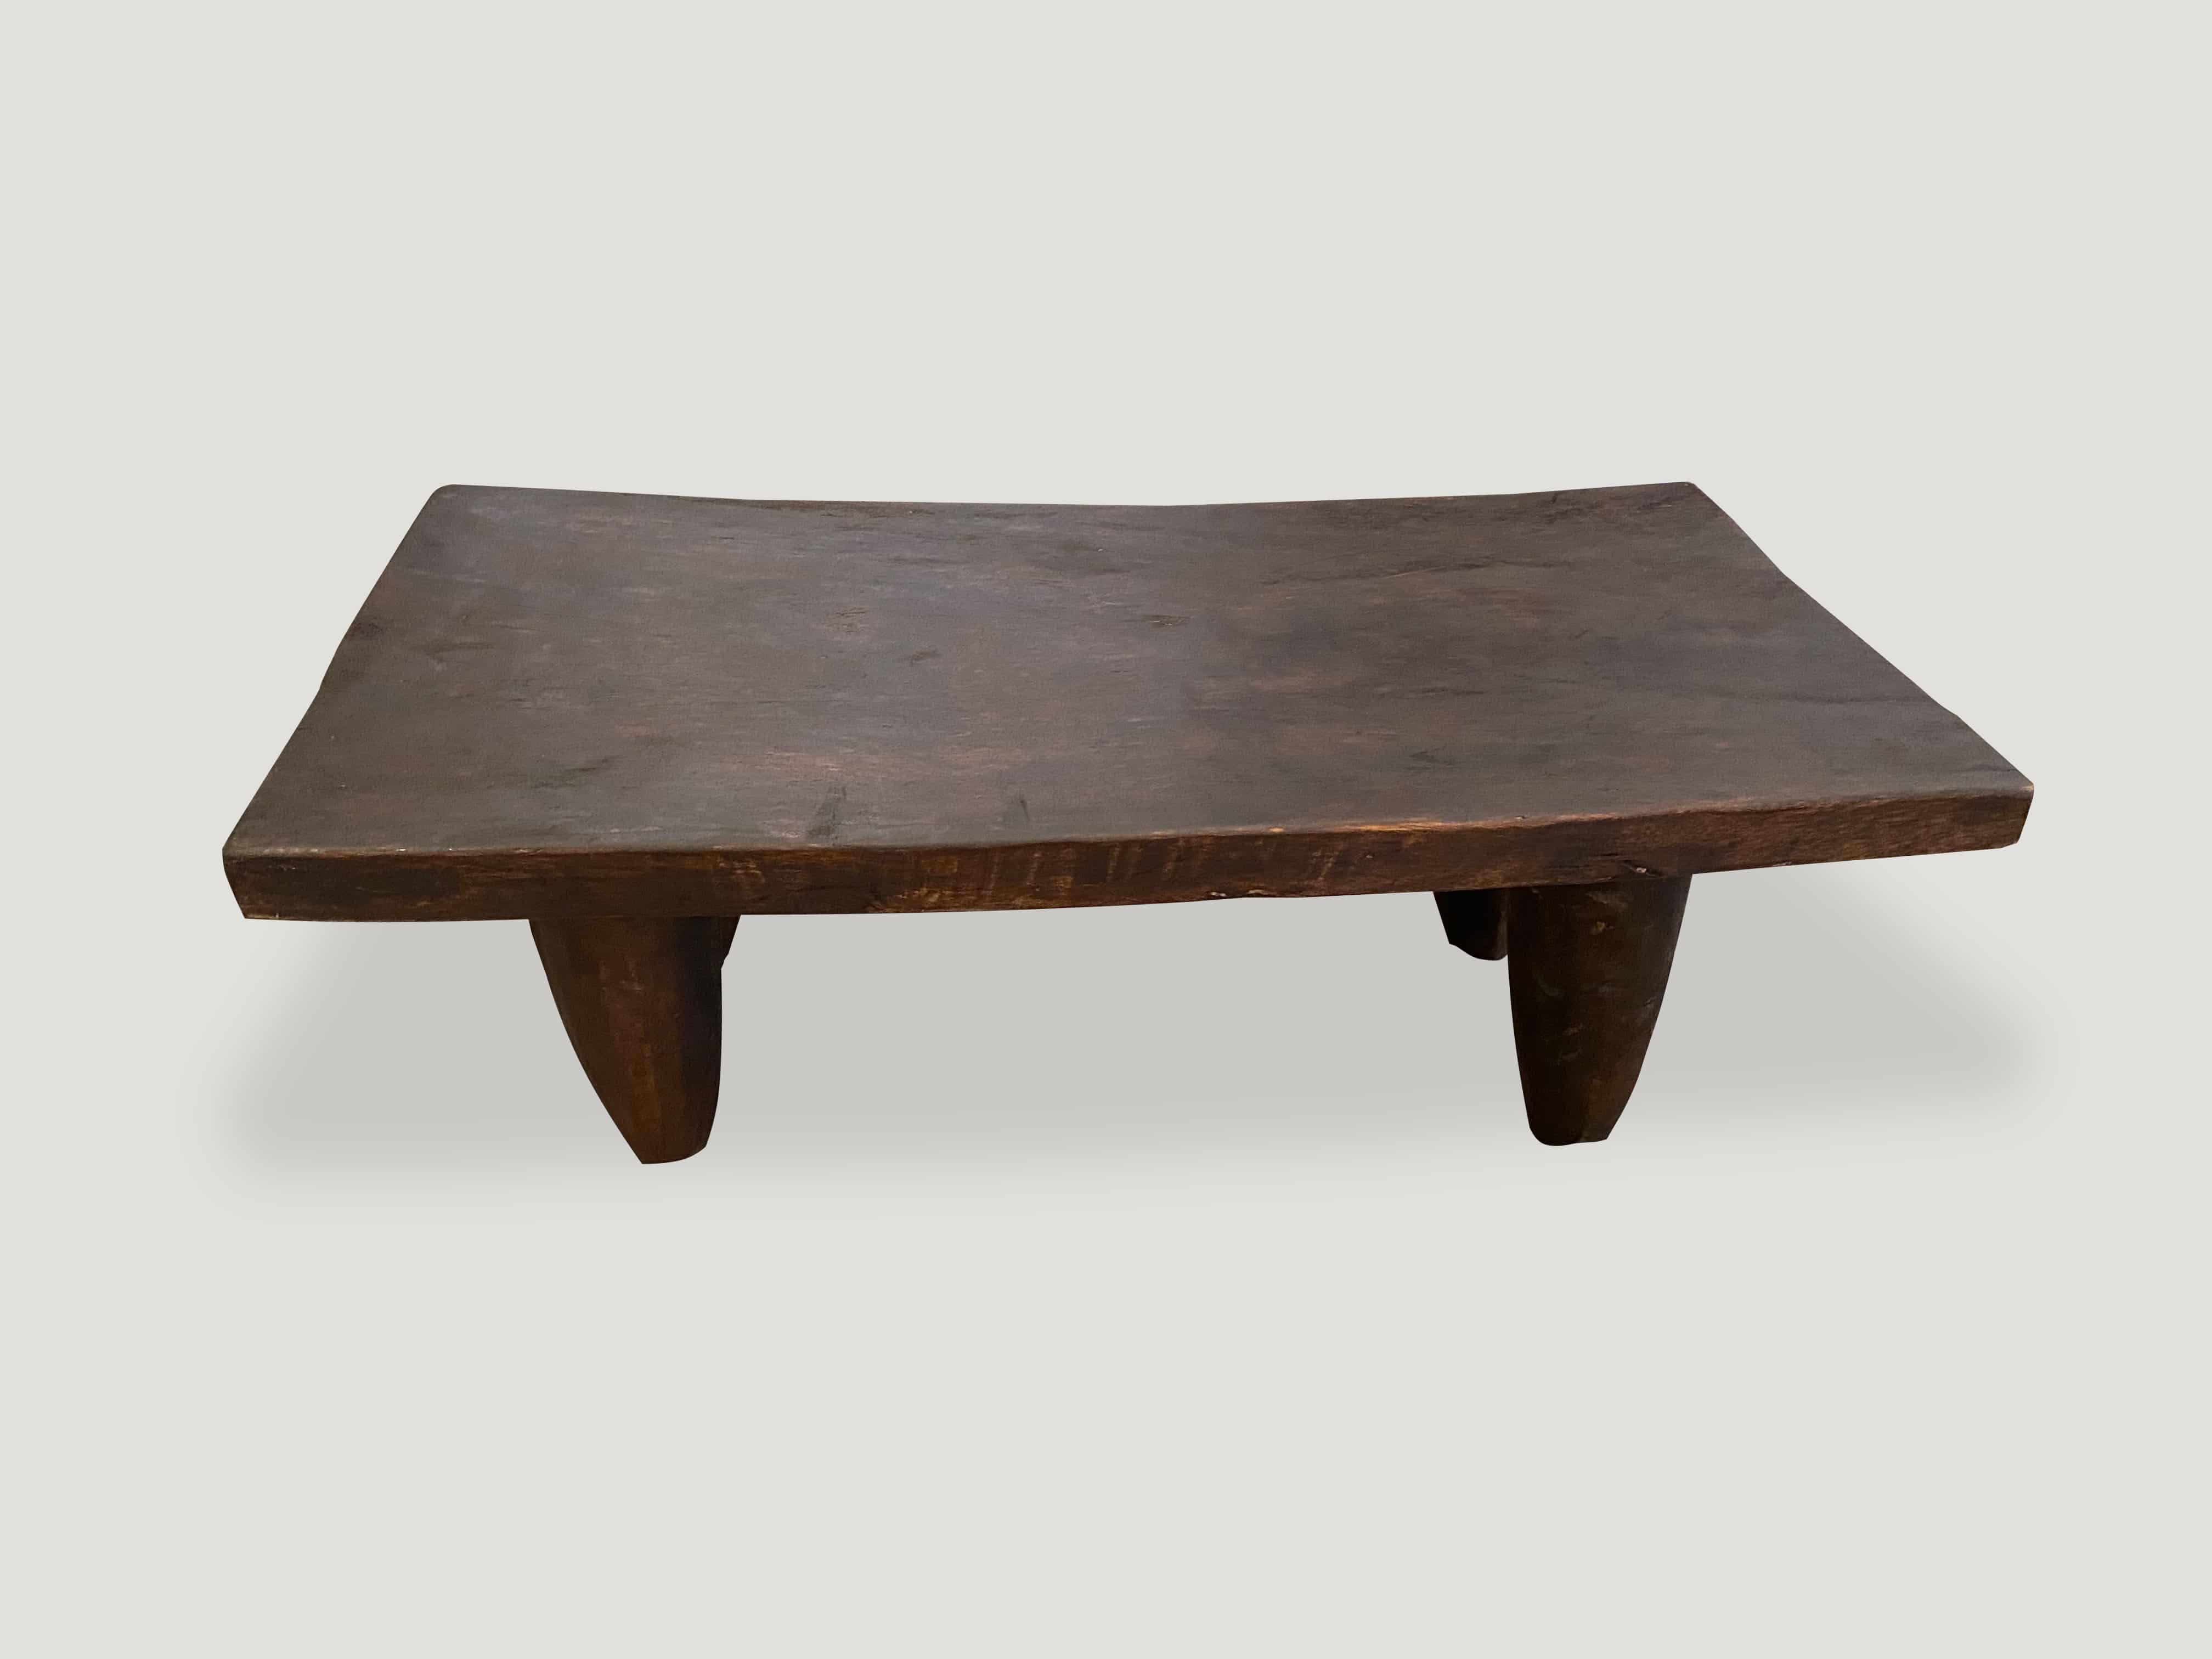 Iroko Wood African Bench Or Coffee Table 308a Andrianna Shamaris